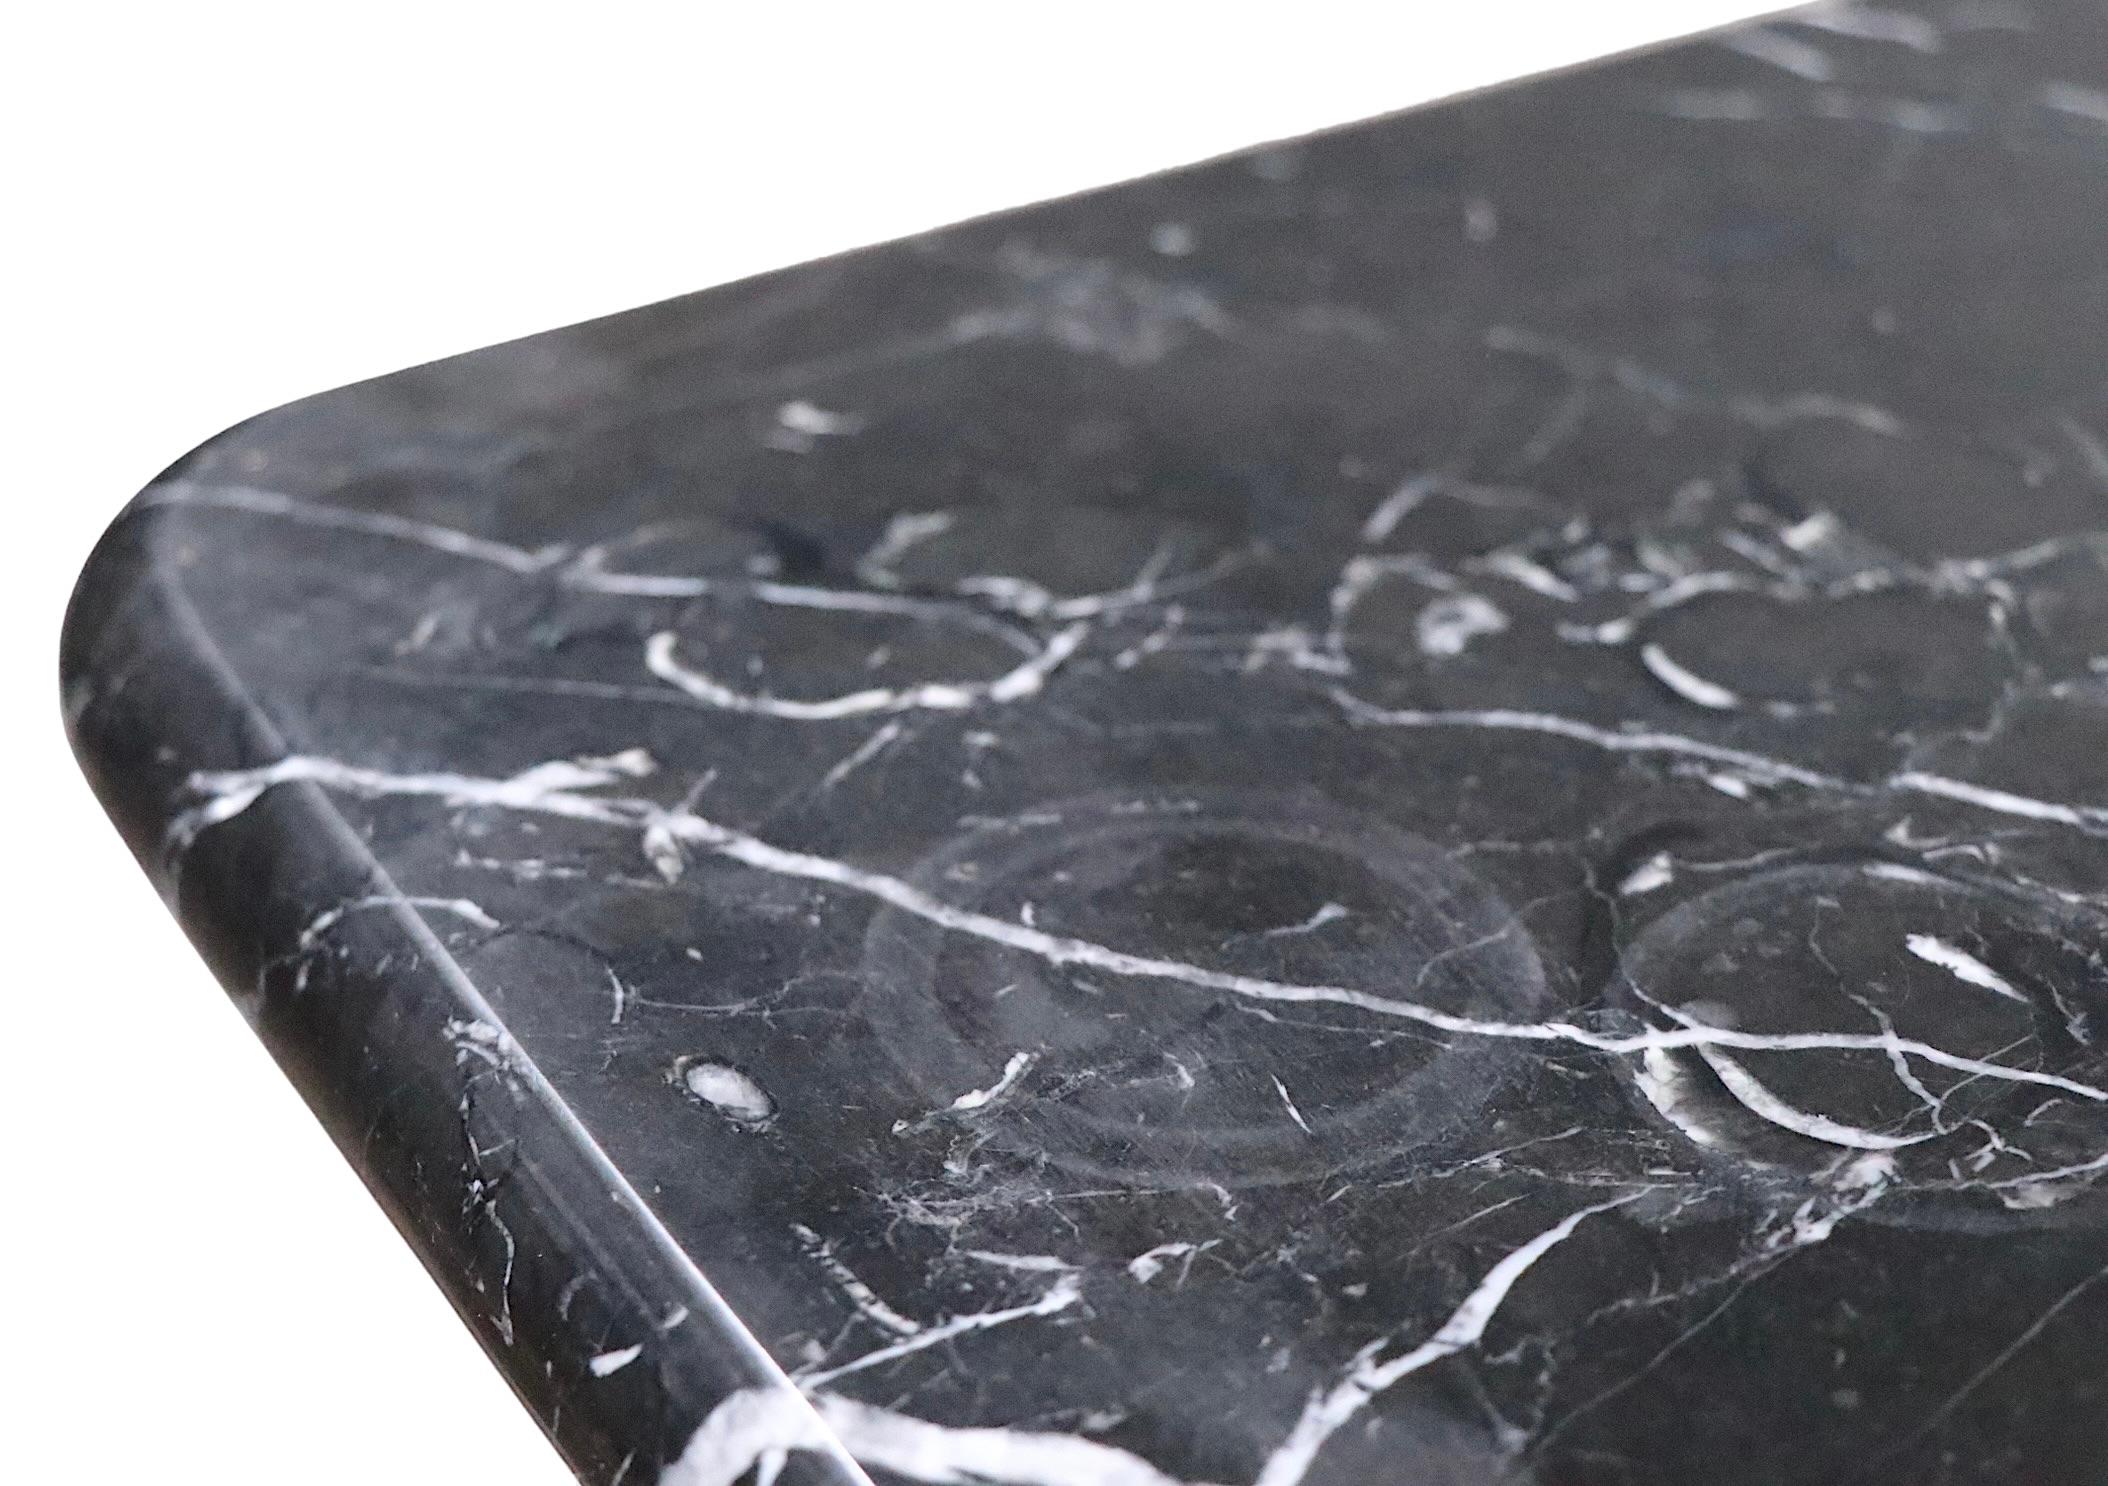 Post Modern Black Marble Pedestal Base Coffee Table Made in Italy c 1970’s For Sale 5